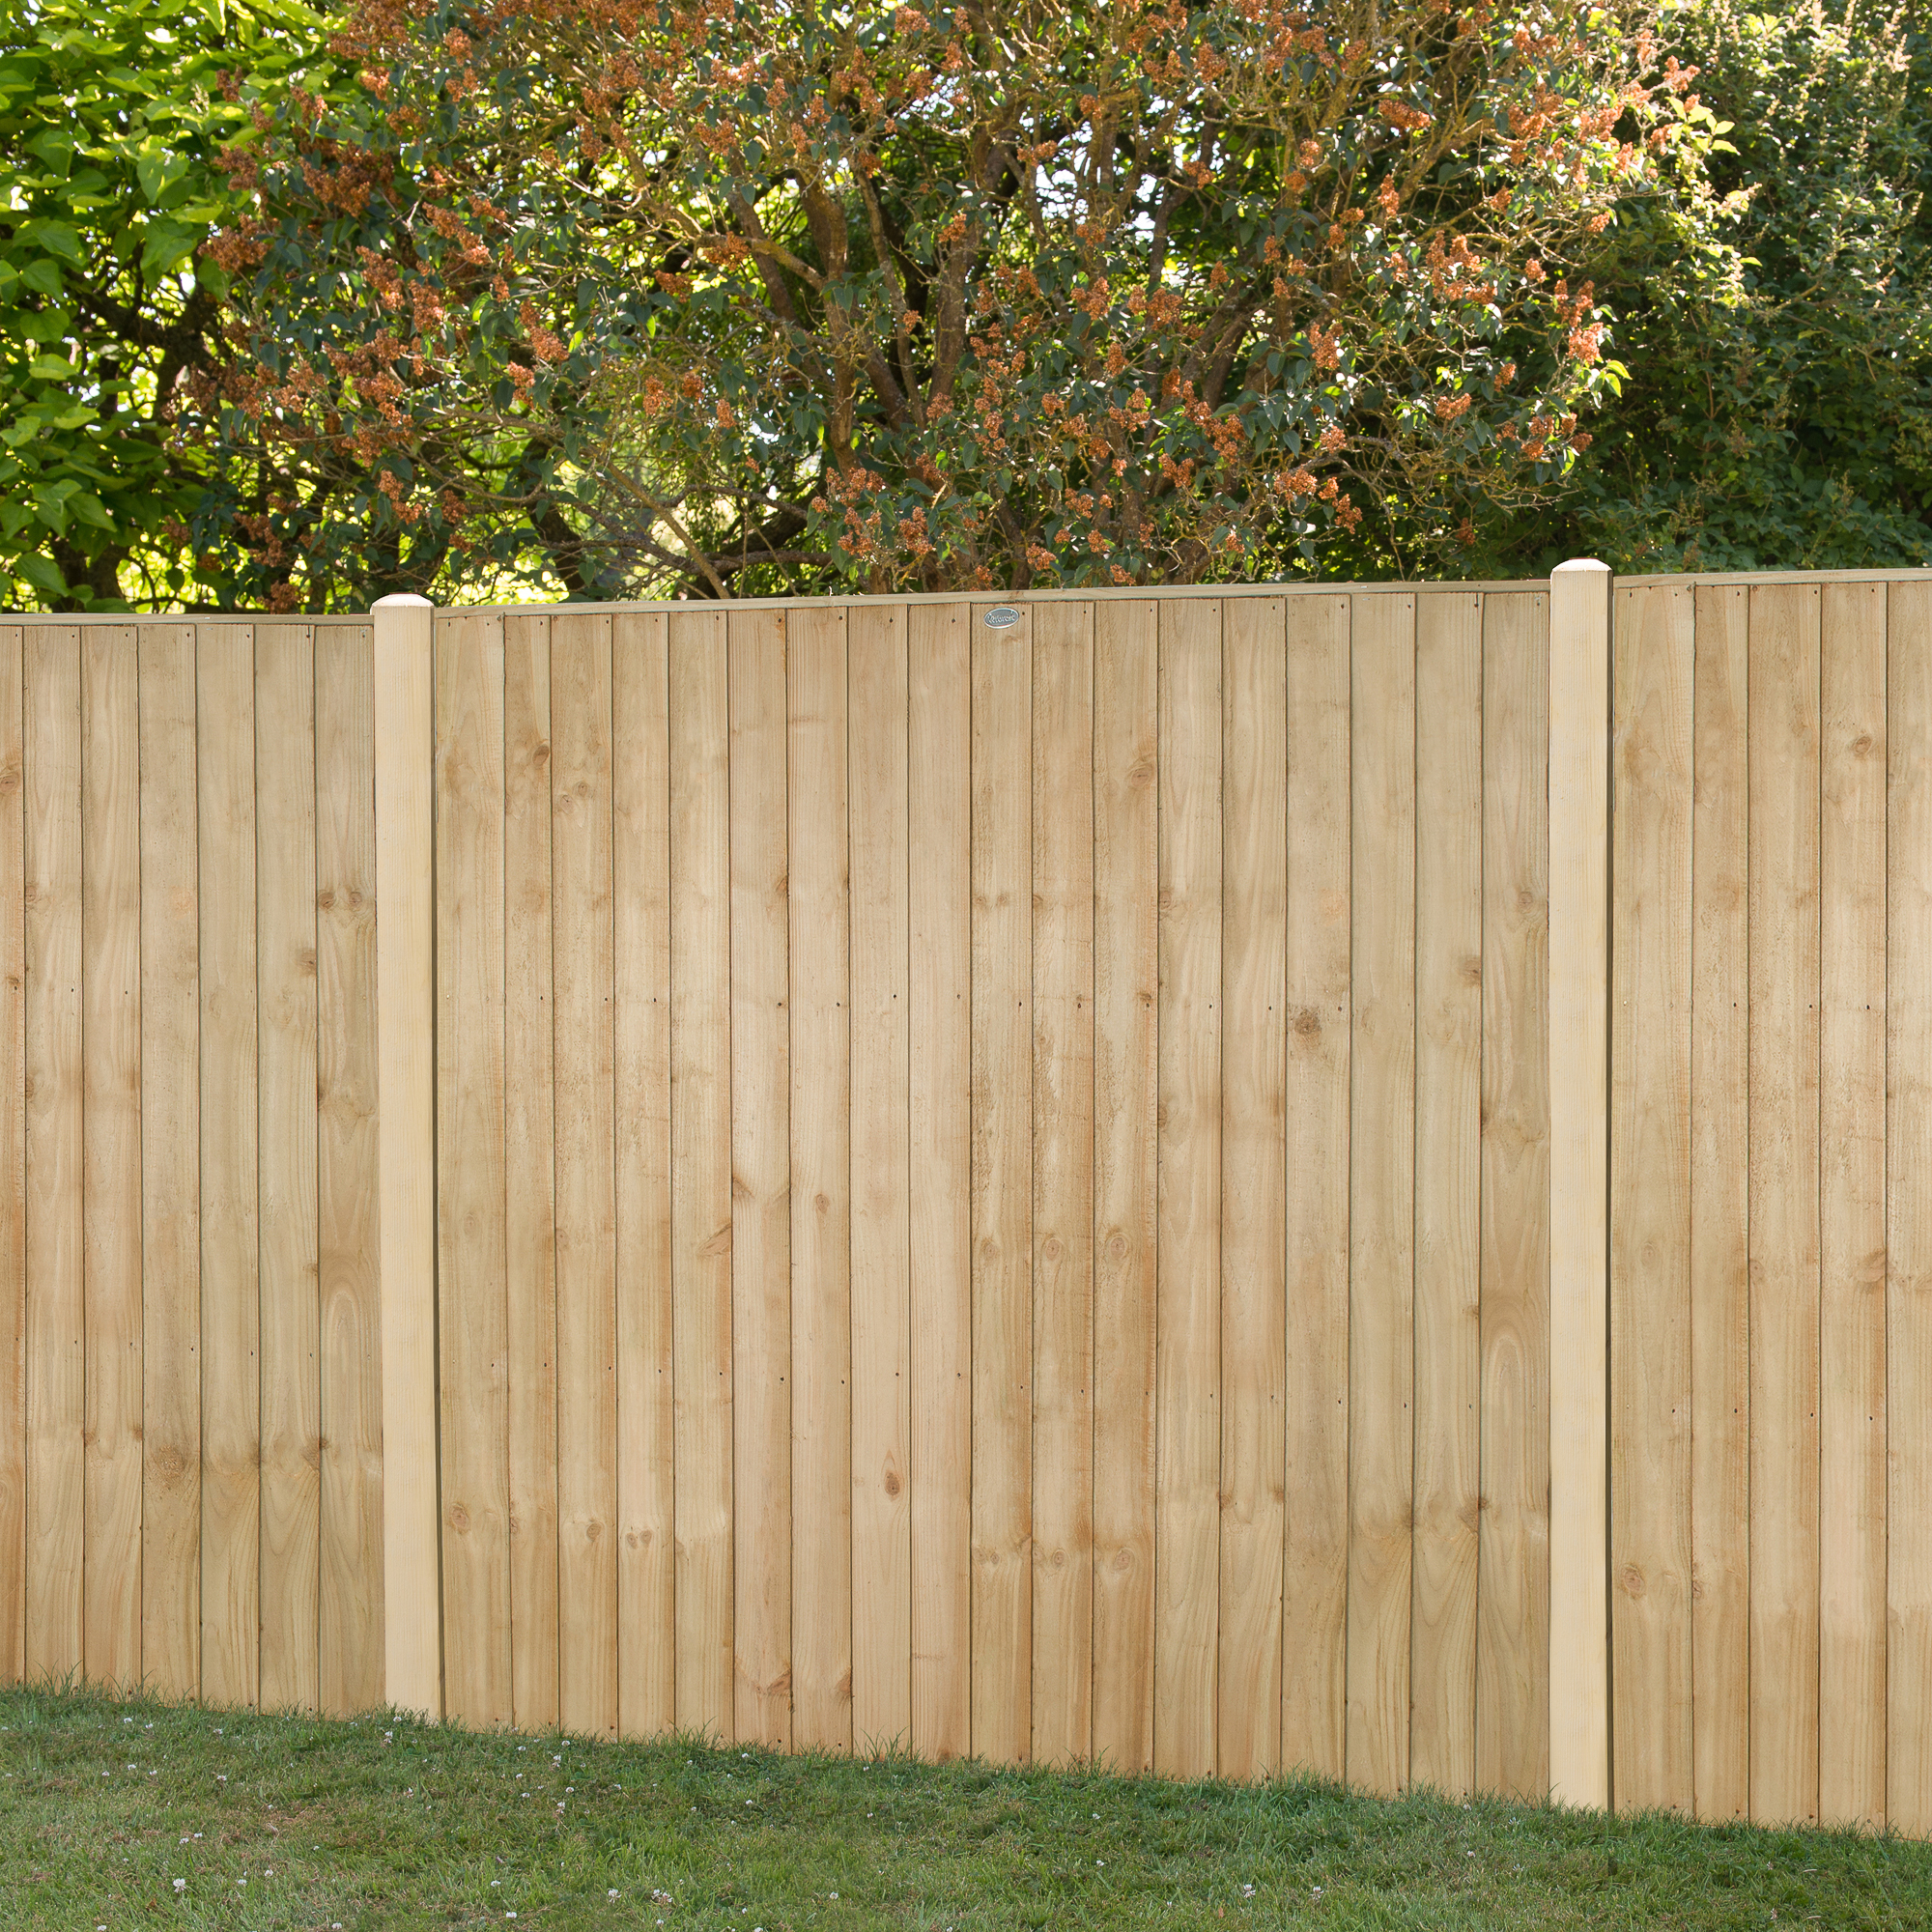 Image of Forest Garden Pressure Treated Closeboard Fence Panel - 1830 x 1540mm - 6 x 5ft - Pack of 4